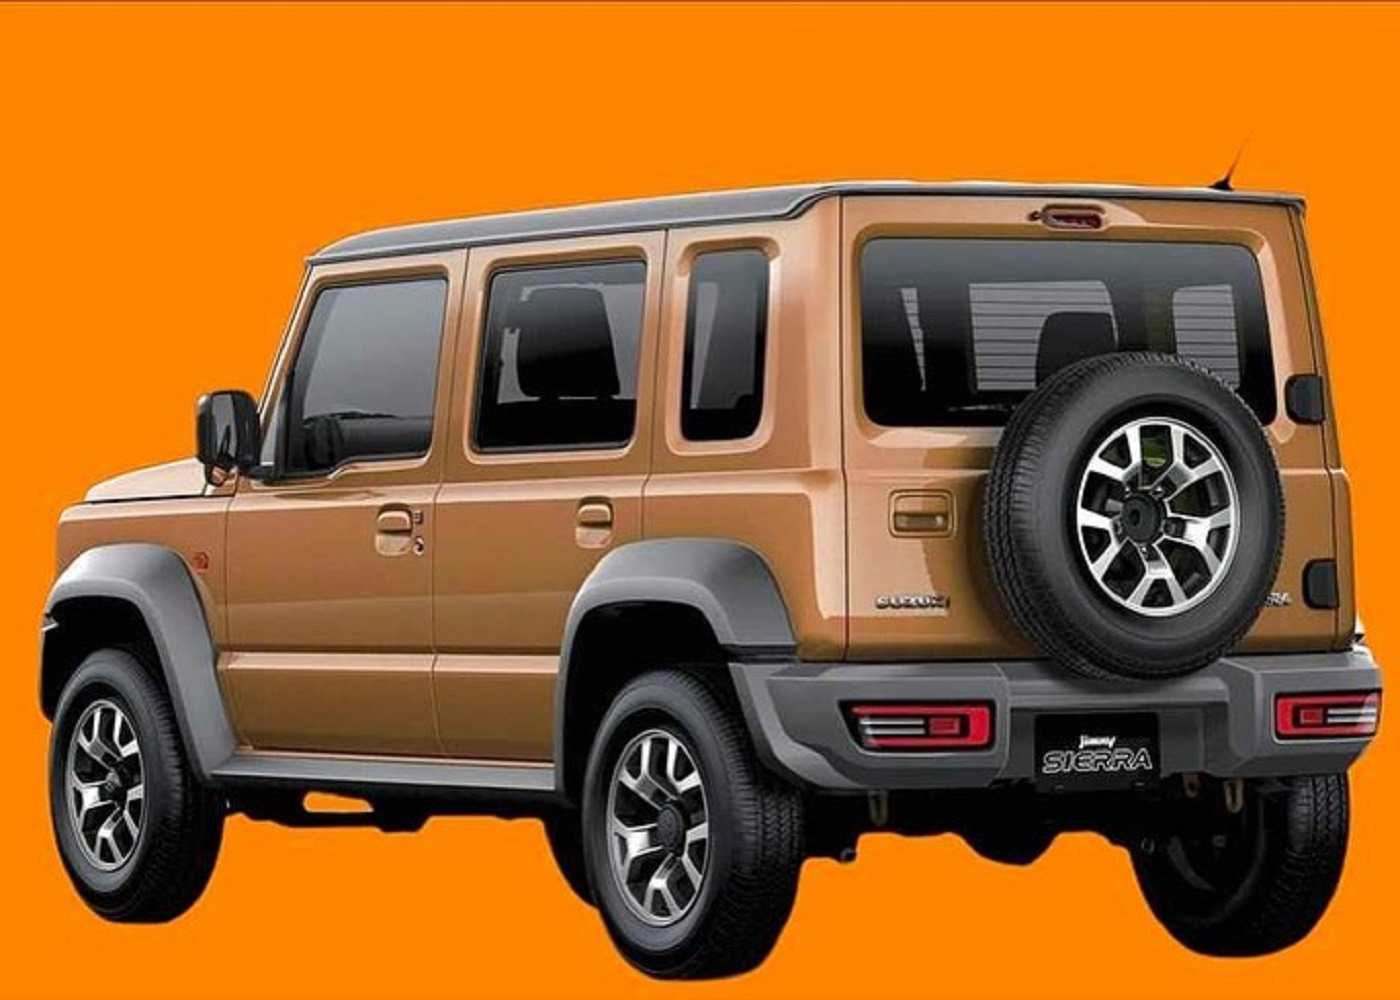 5Door Suzuki Jimny Launch Likely In 2023 What We Know So Far!